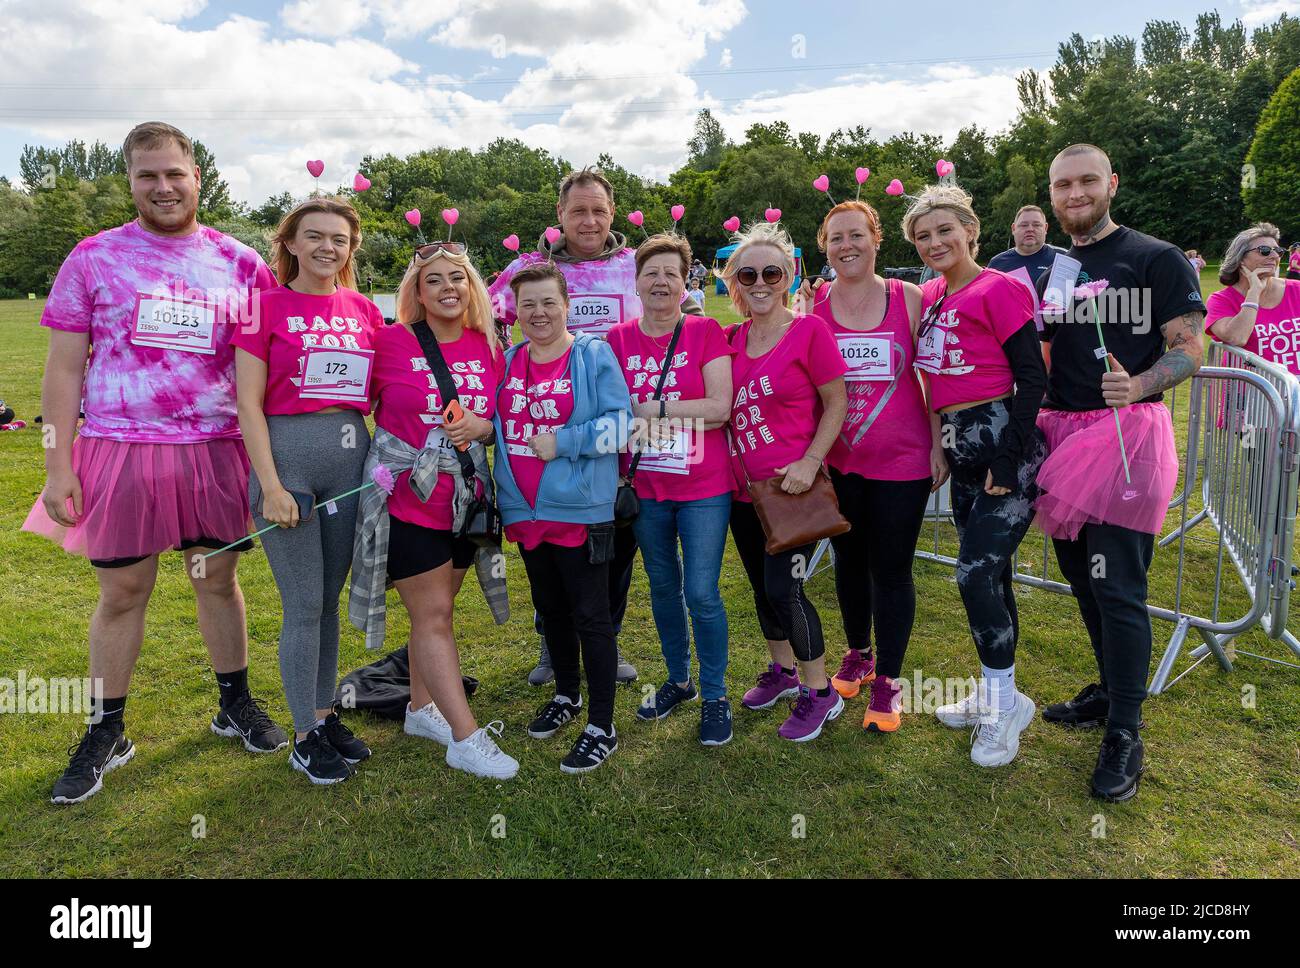 12 June 2022; Warrington Cheshire, UK; Race for Life in Victoria Park in aid of Cancer Research. Runners pose for a photo before the run Credit: John Hopkins/Alamy Live News Stock Photo